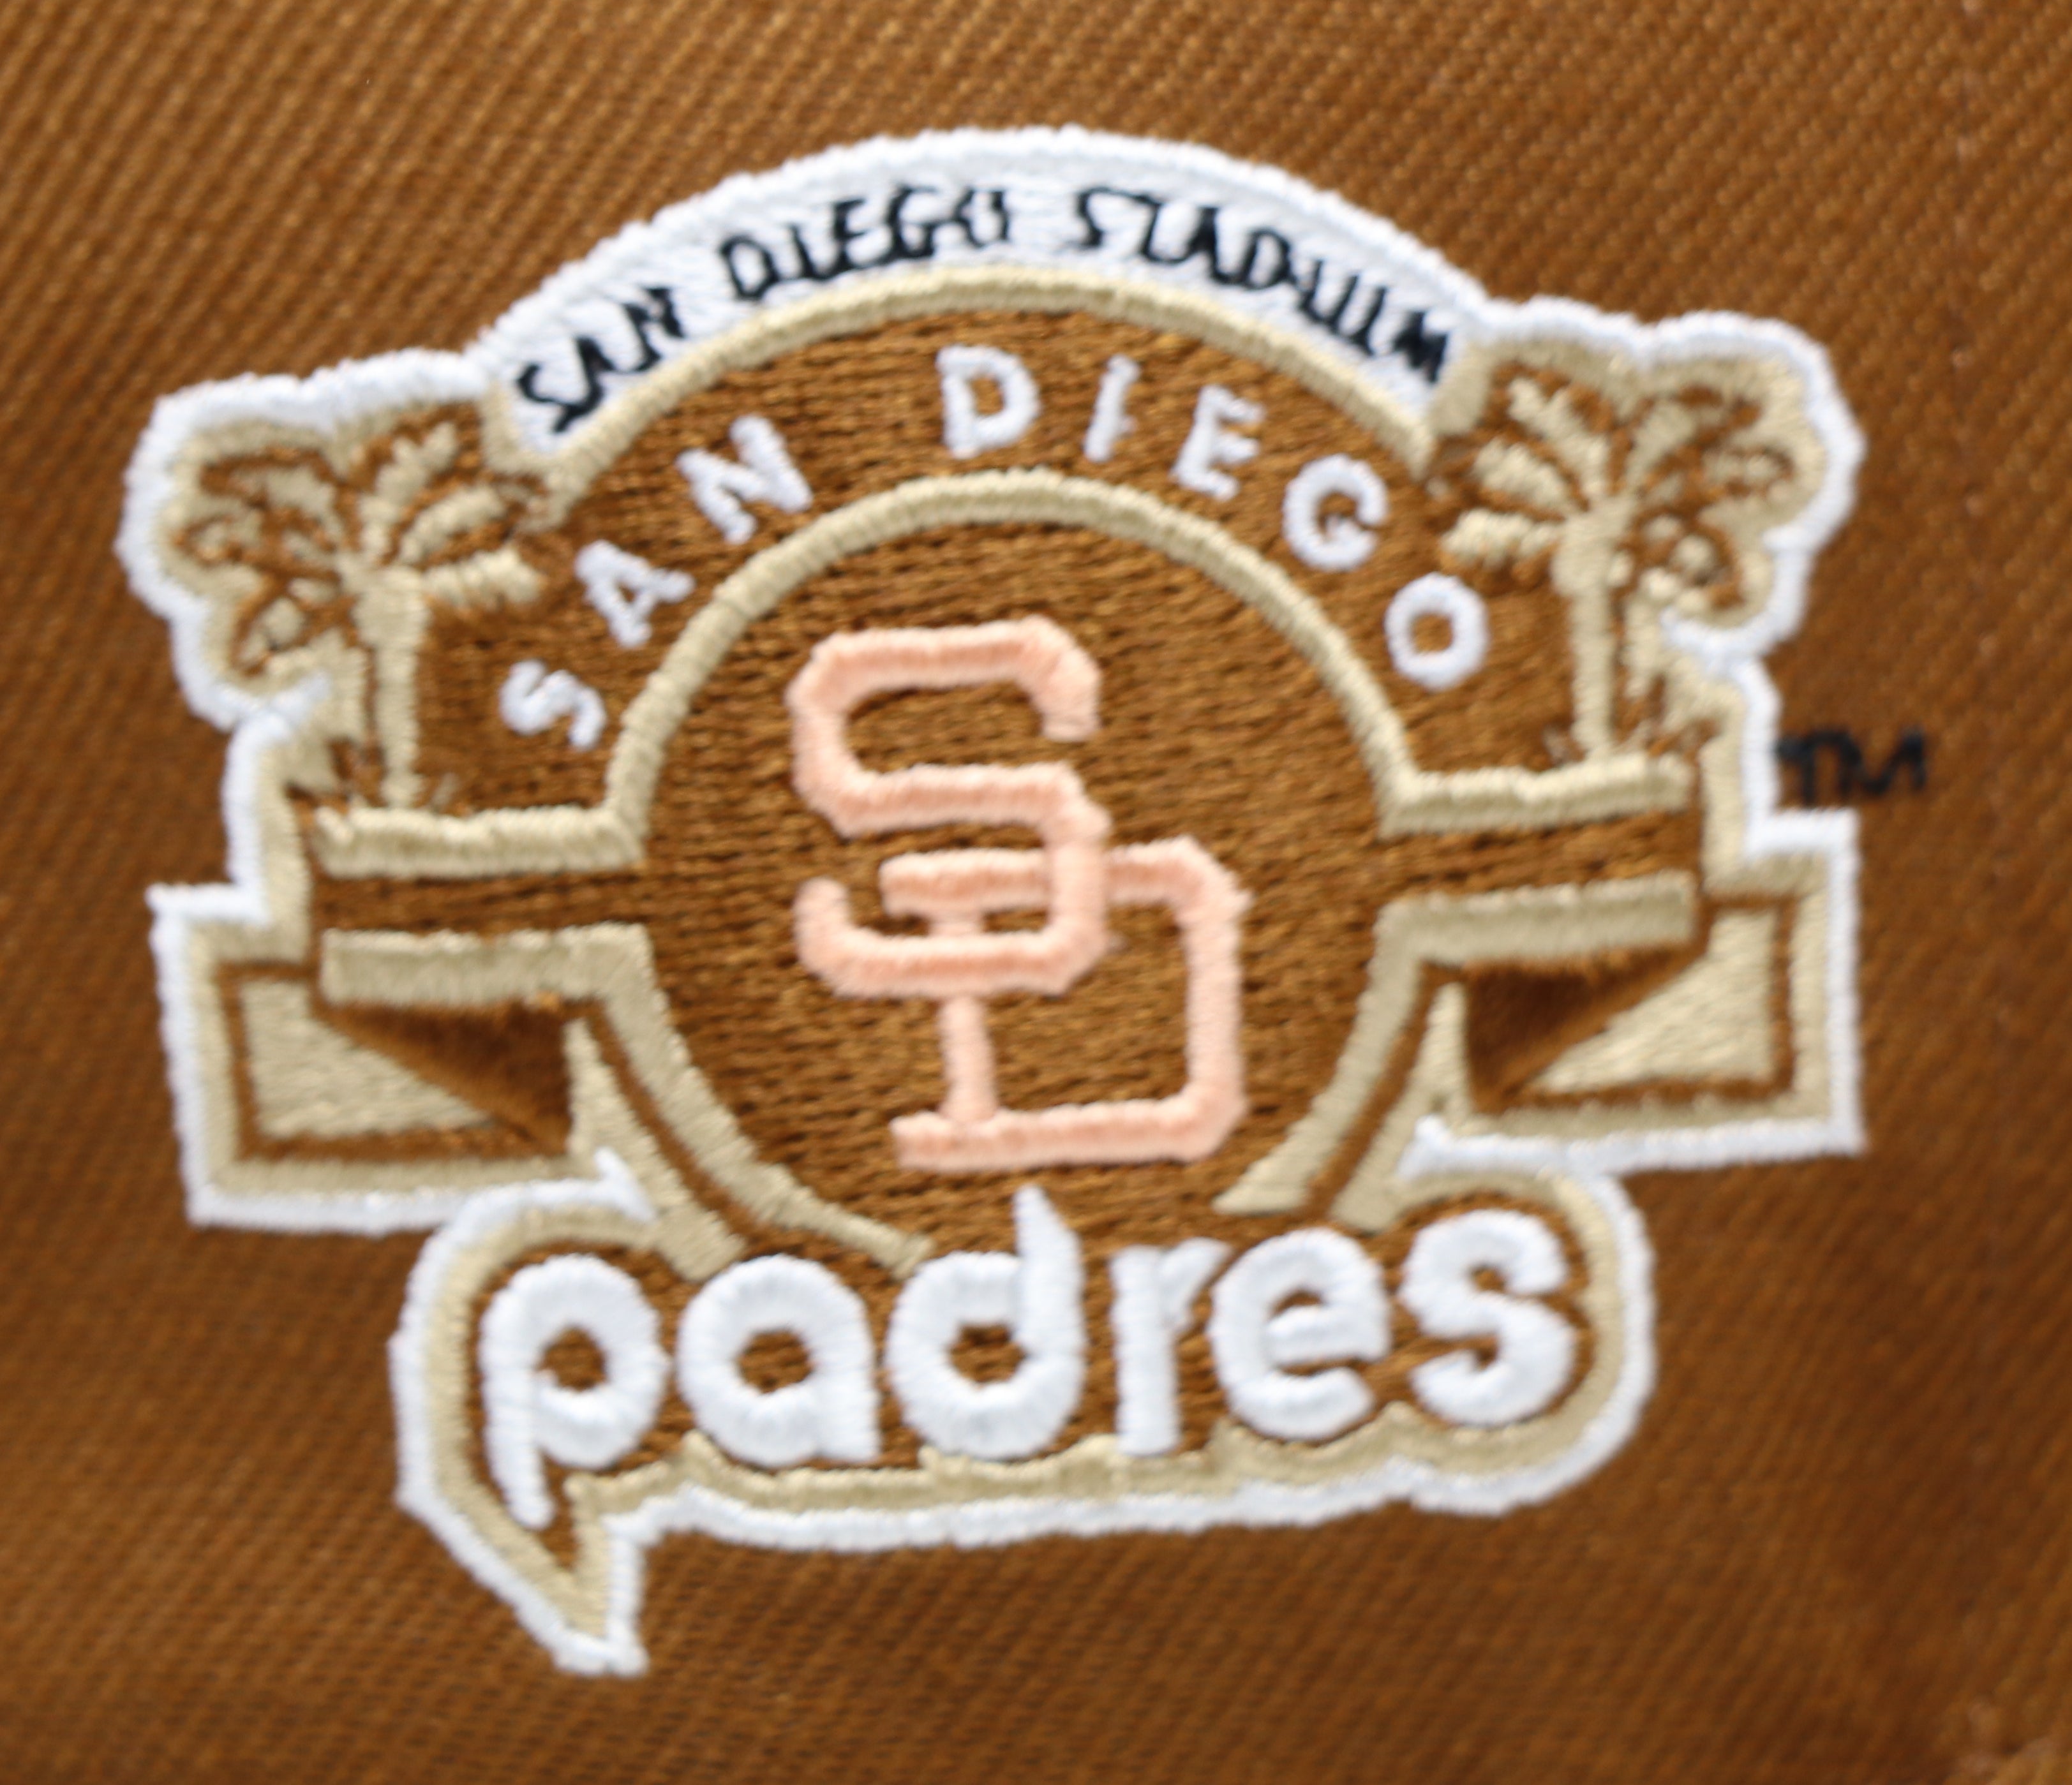 SAN DIEGO PADRES (SAN DIEGO STADIUM) NEW ERA 59FIFTY FITTED (CHROME UNDERVISOR)